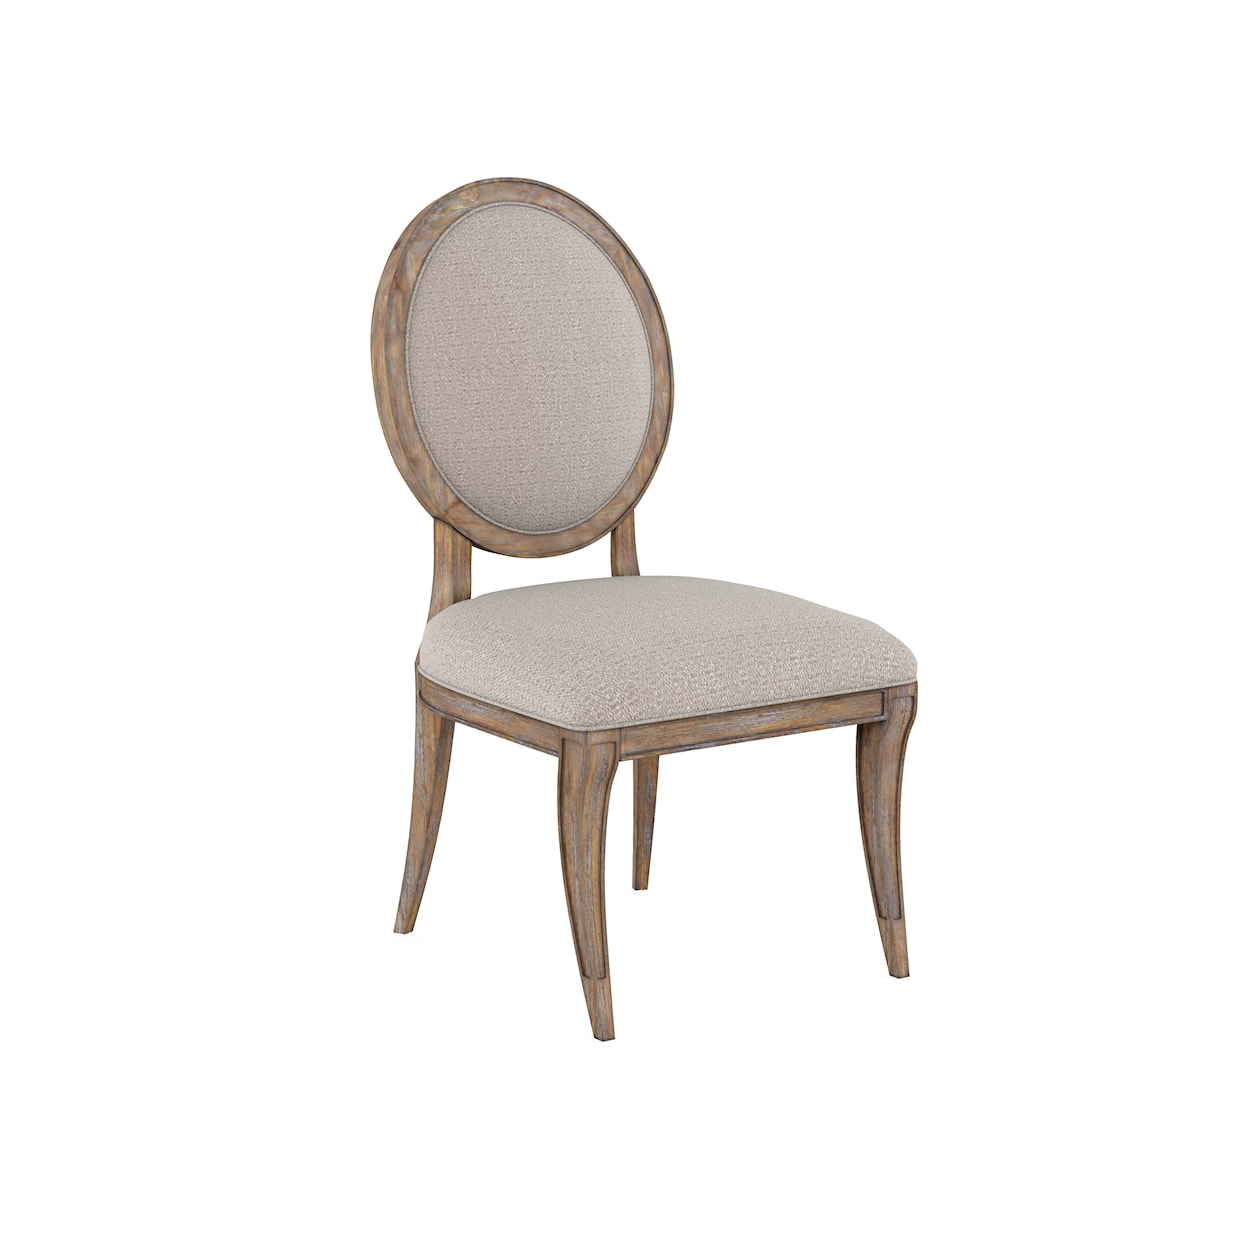 A.R.T. Furniture Inc Architrave Oval Side Chair